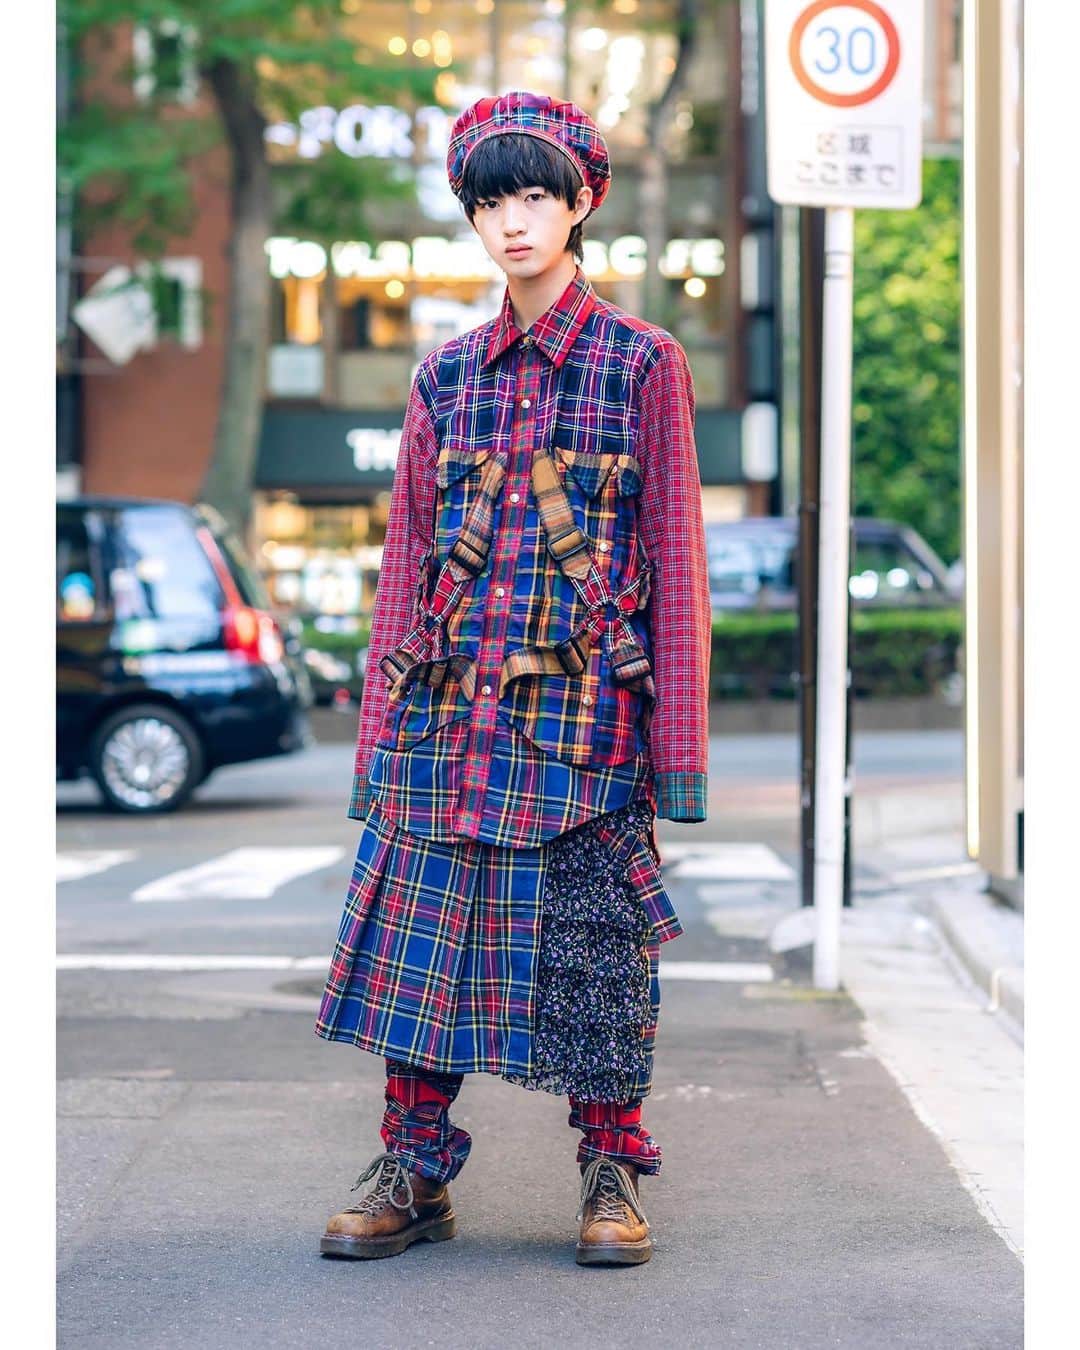 Tokyo Fashion on X: 20-year-old Japanese stylist Fumidon on the street in  Harajuku wearing an iconic rope print jacket by the late Tokyo-based  designer Christopher Nemeth with a Nemeth hat, Nemeth tie